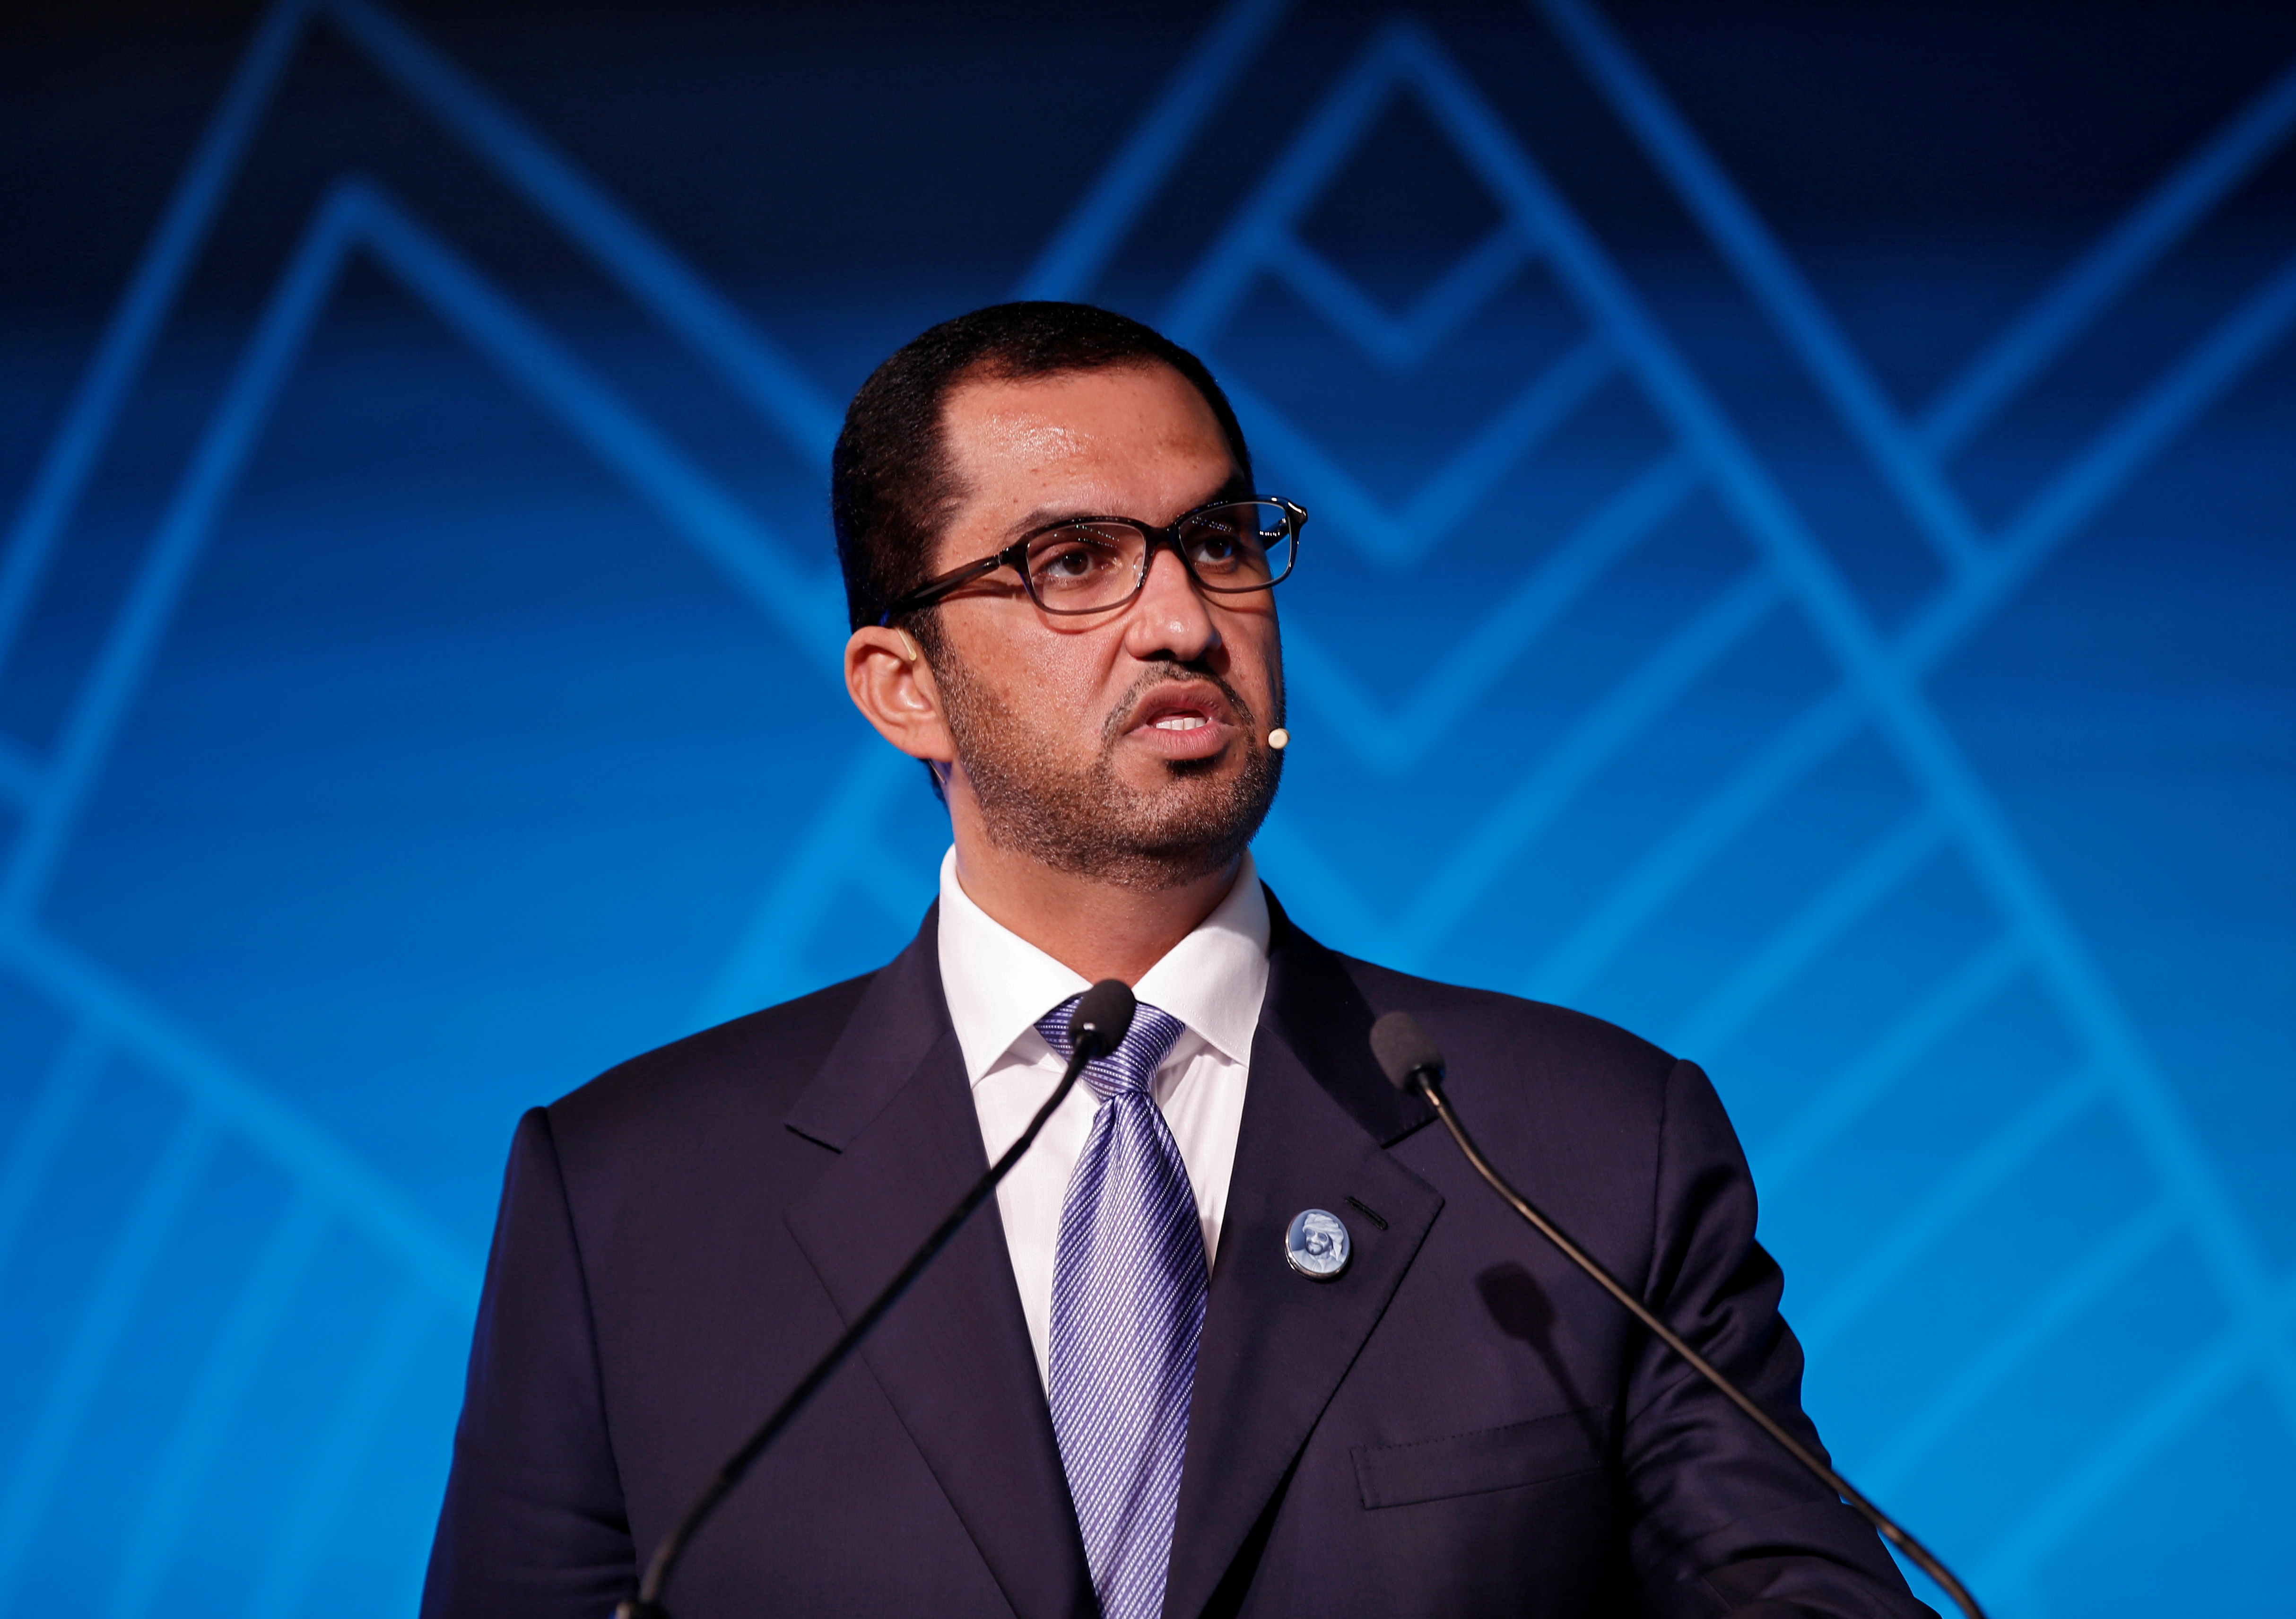 Sultan Ahmed Al Jaber, UAE Minister of State and ADNOC Group CEO, addresses a gathering during the India Energy Forum in New Delhi